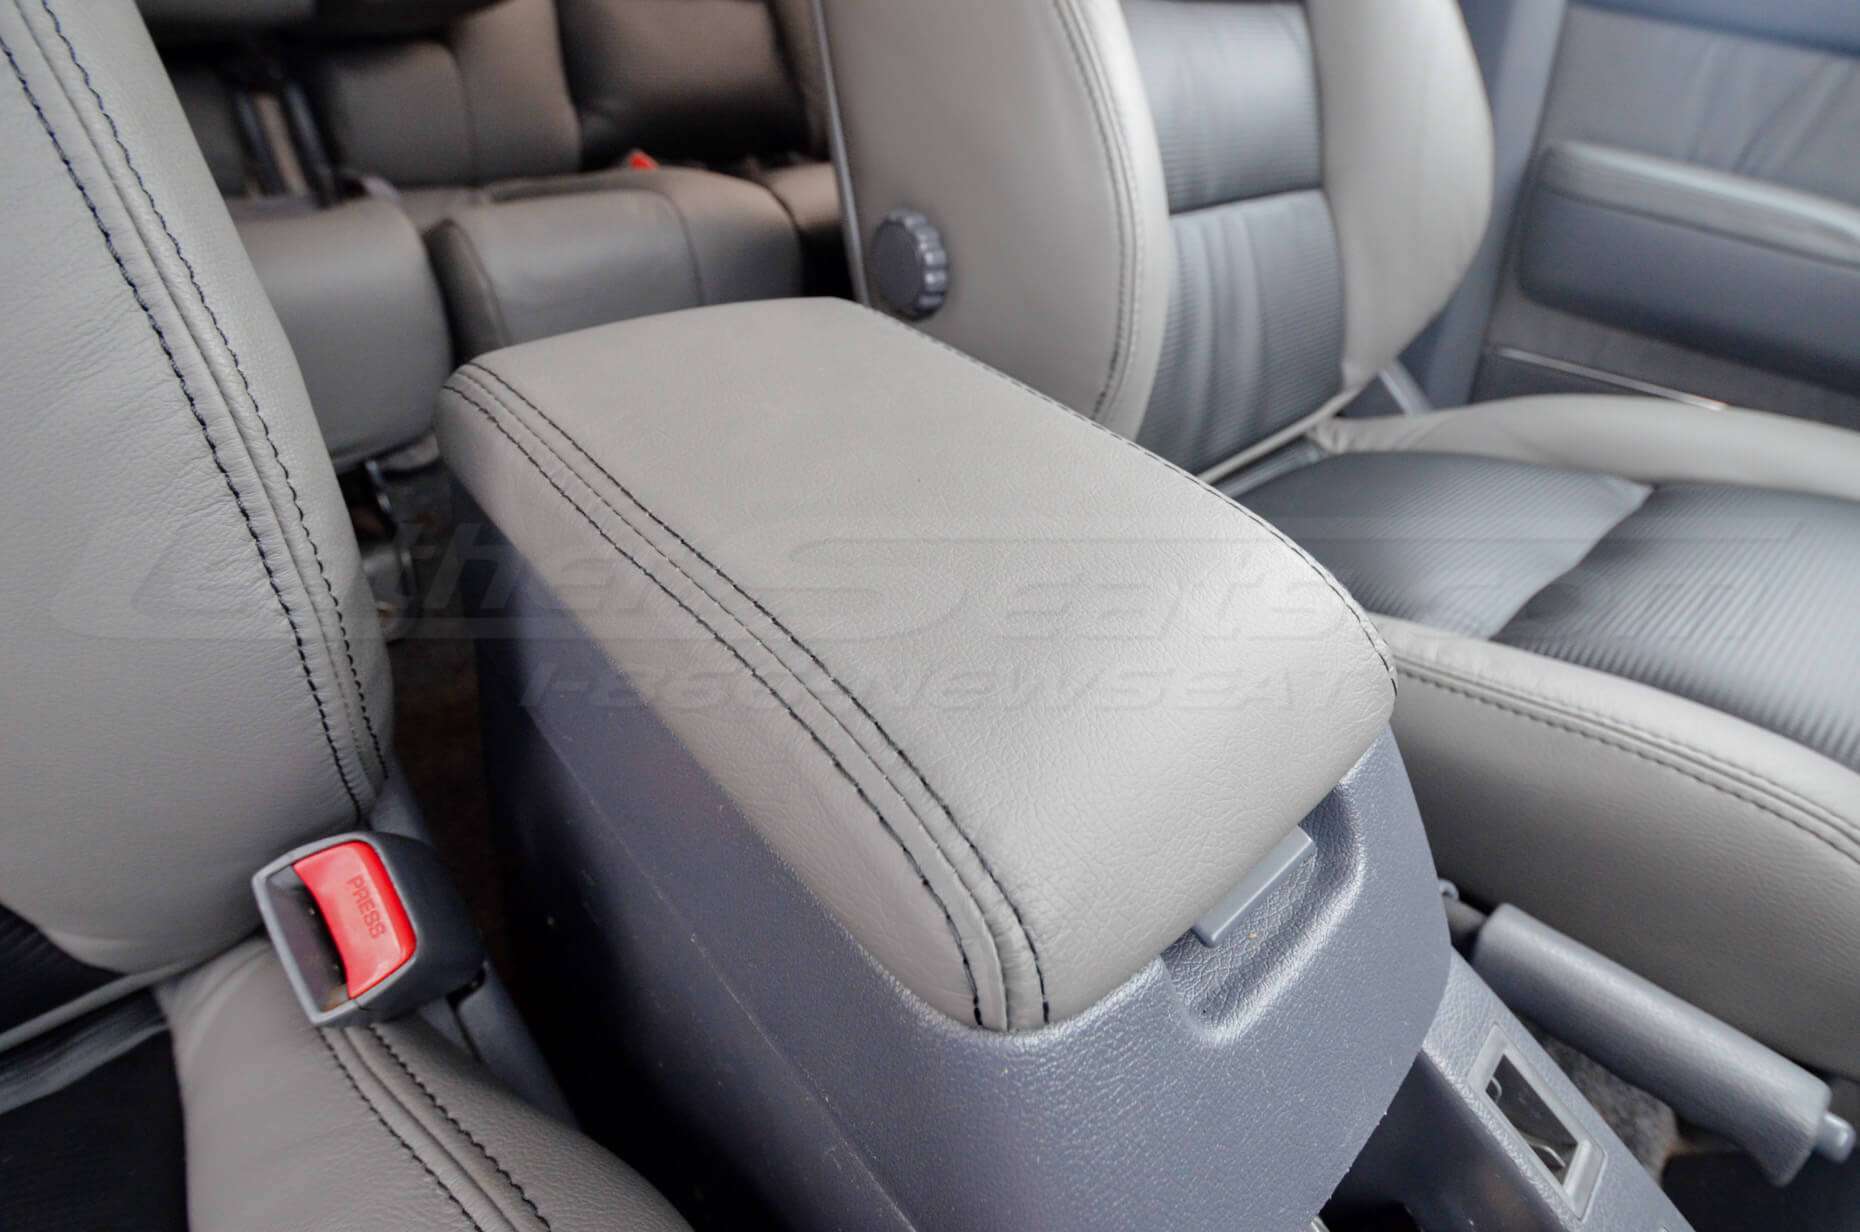 1994-1997 Toyota Landcruiser Console Lid Cover in Light Grey with contrasting Black double-stitching